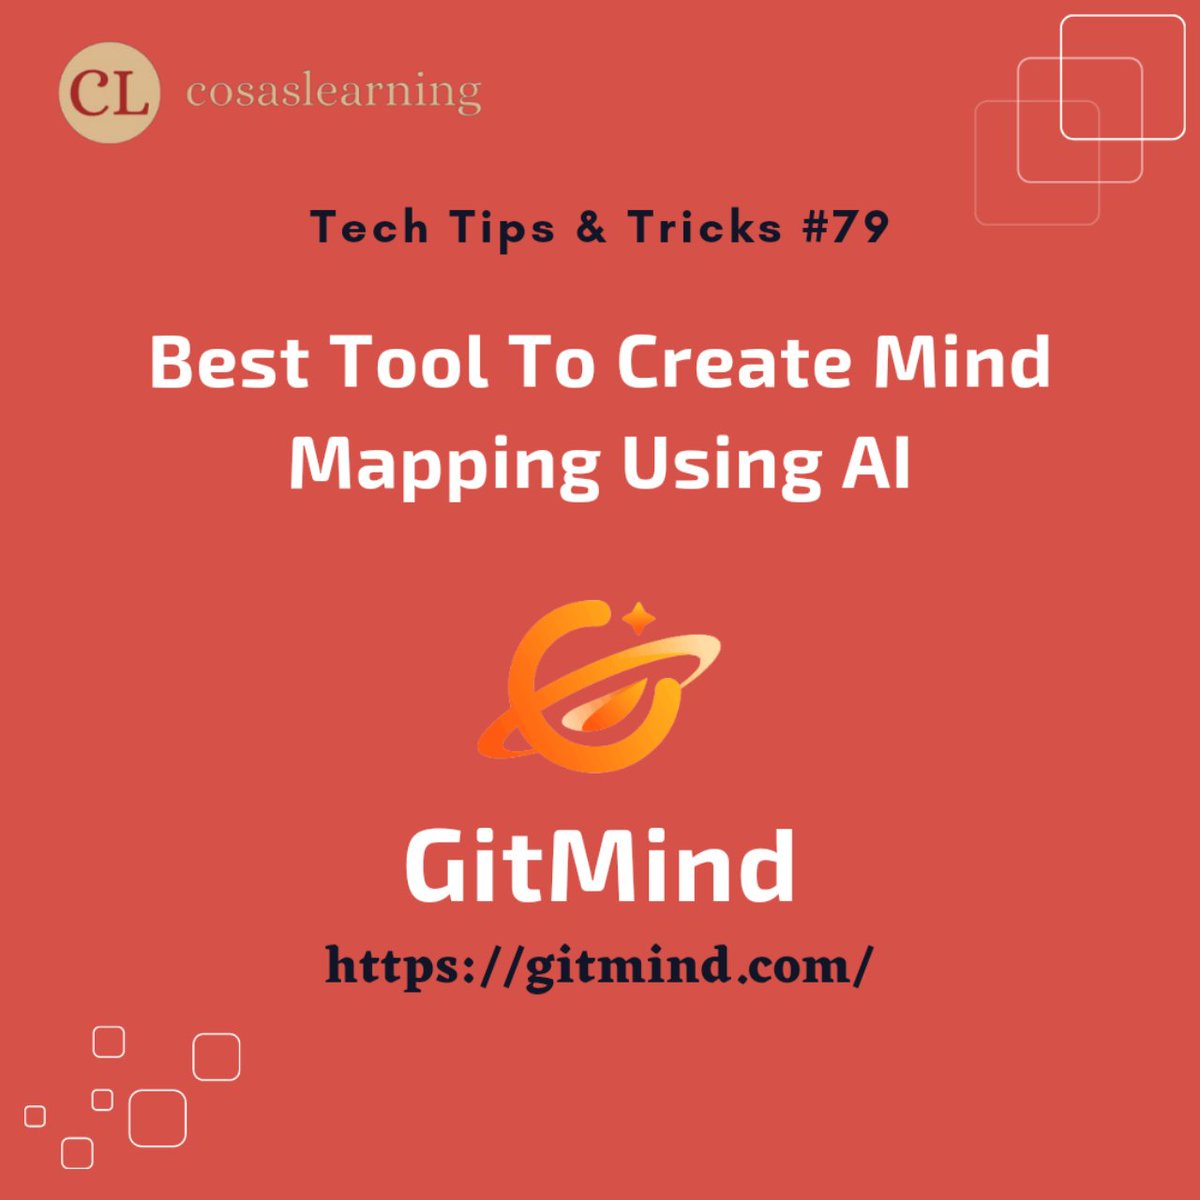 Best Tool To Create Mind Mapping Using AI | Cosas Learning | Tech Tips & Tricks #79

#cosas #tools #tool #cosaslearning  #techtipsandtricks #tech #mindmapping #ai #gitmind #mindmap #mindmaps